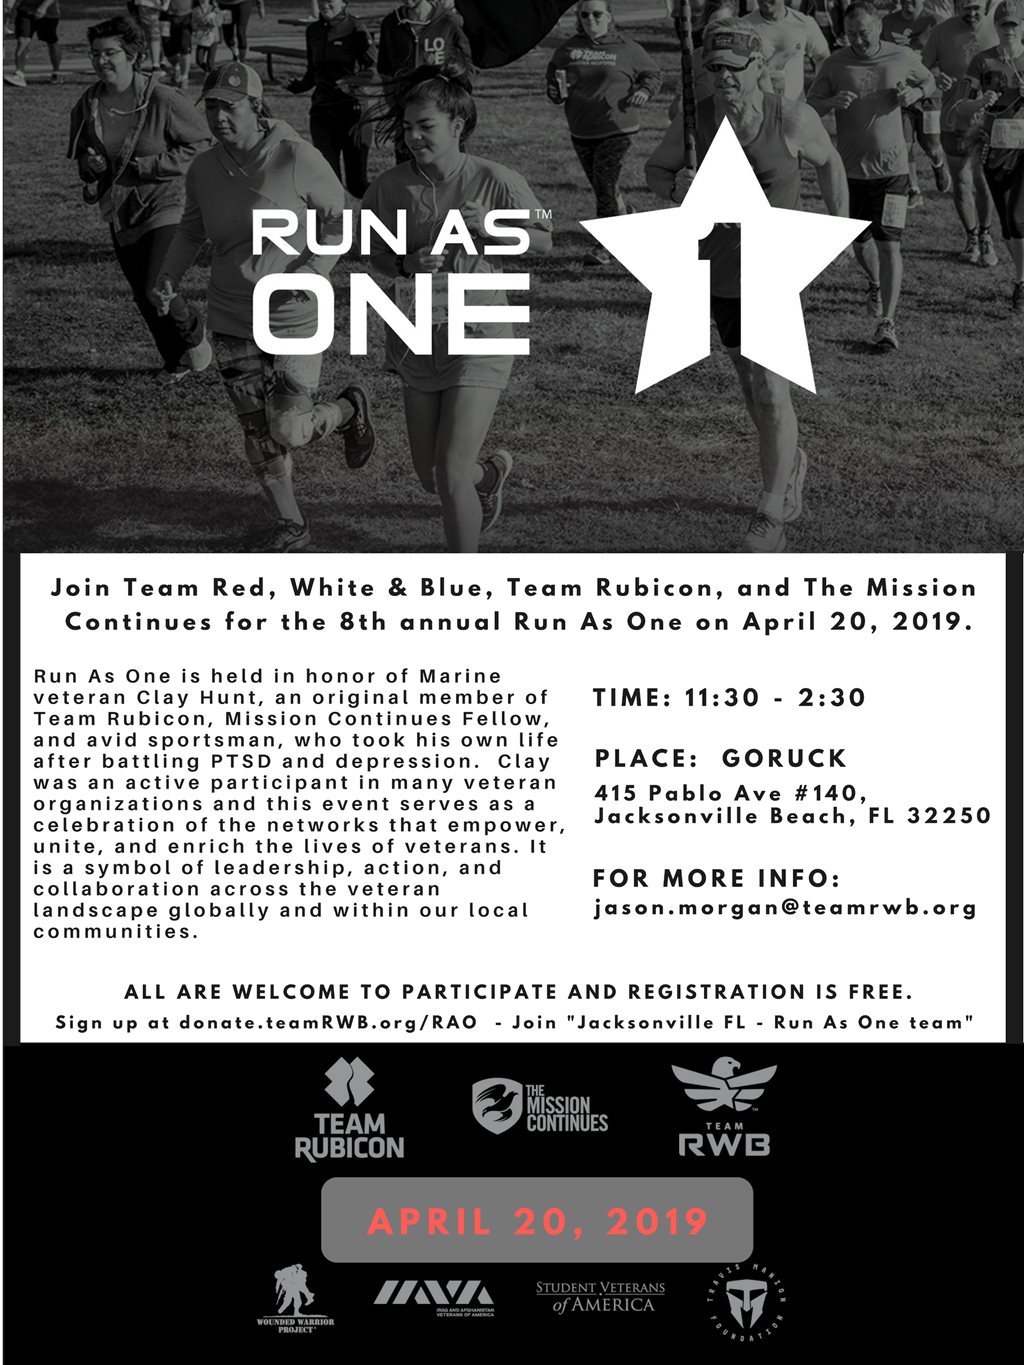 Join Team Red, White & Blue, Team Rubicon, and The Mission Continues for the 8th annual Run As One on April 20, 2019.